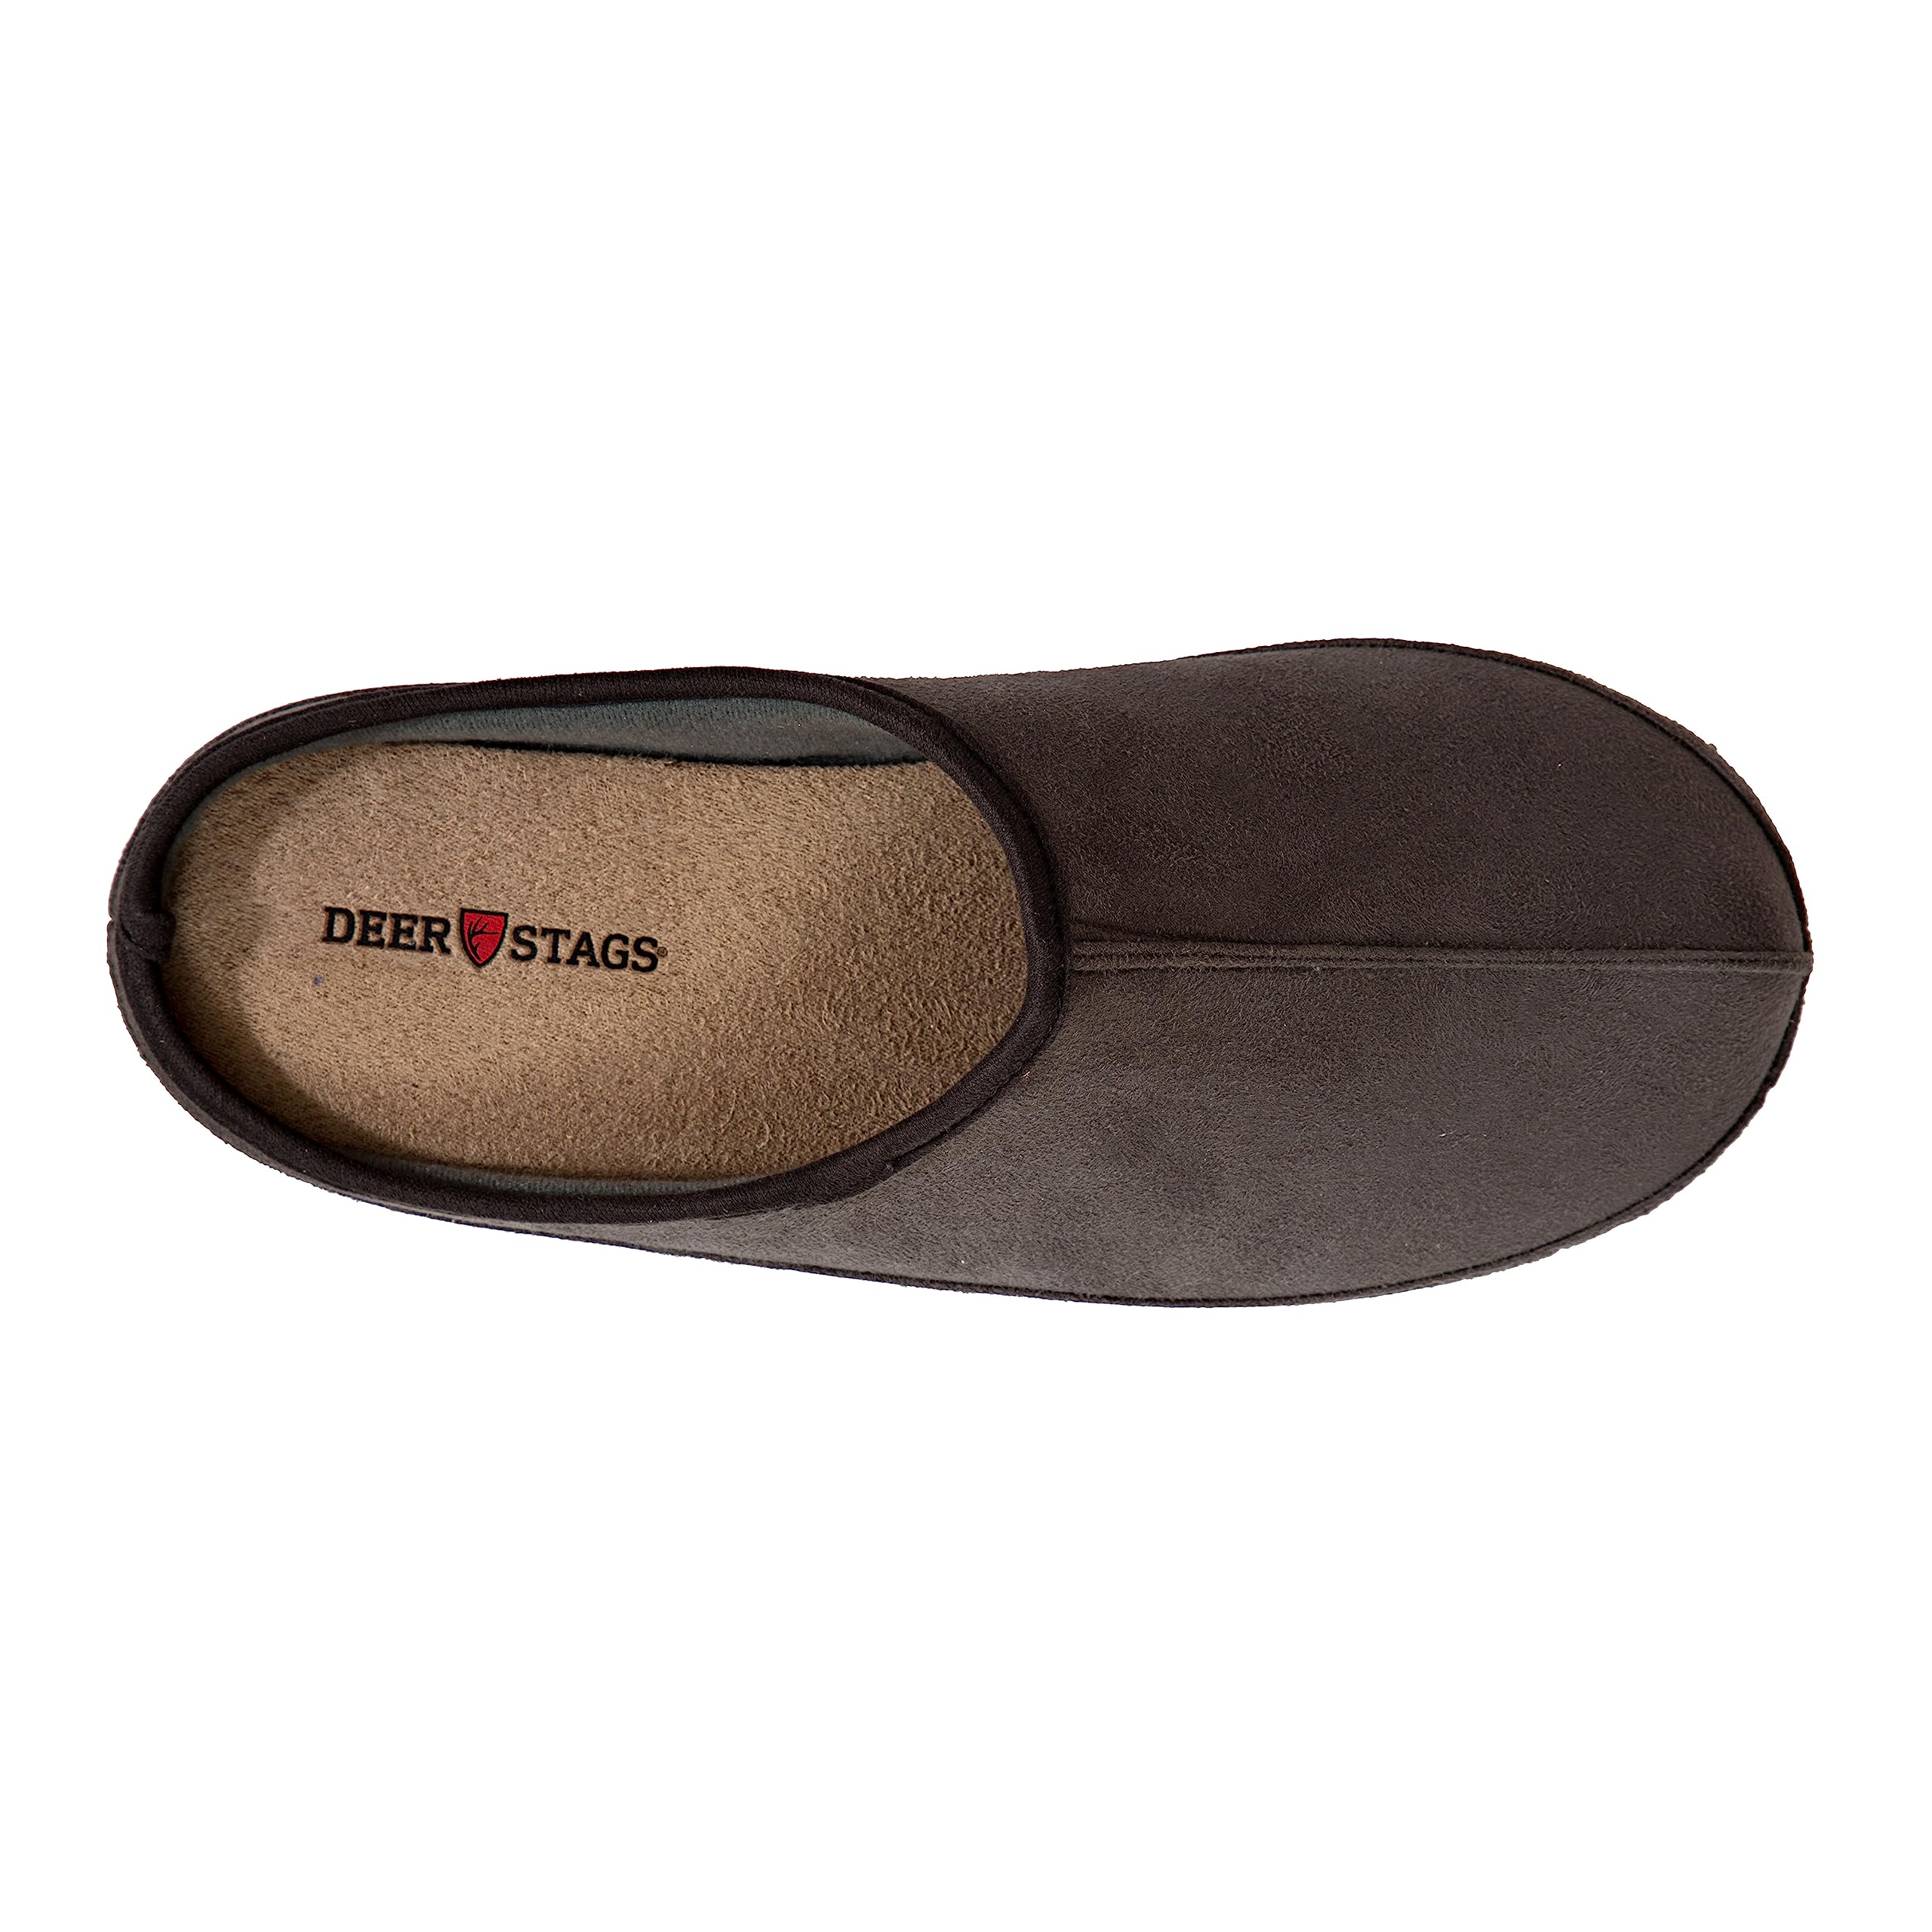 Deer Stags Men's Grizzly Slipper